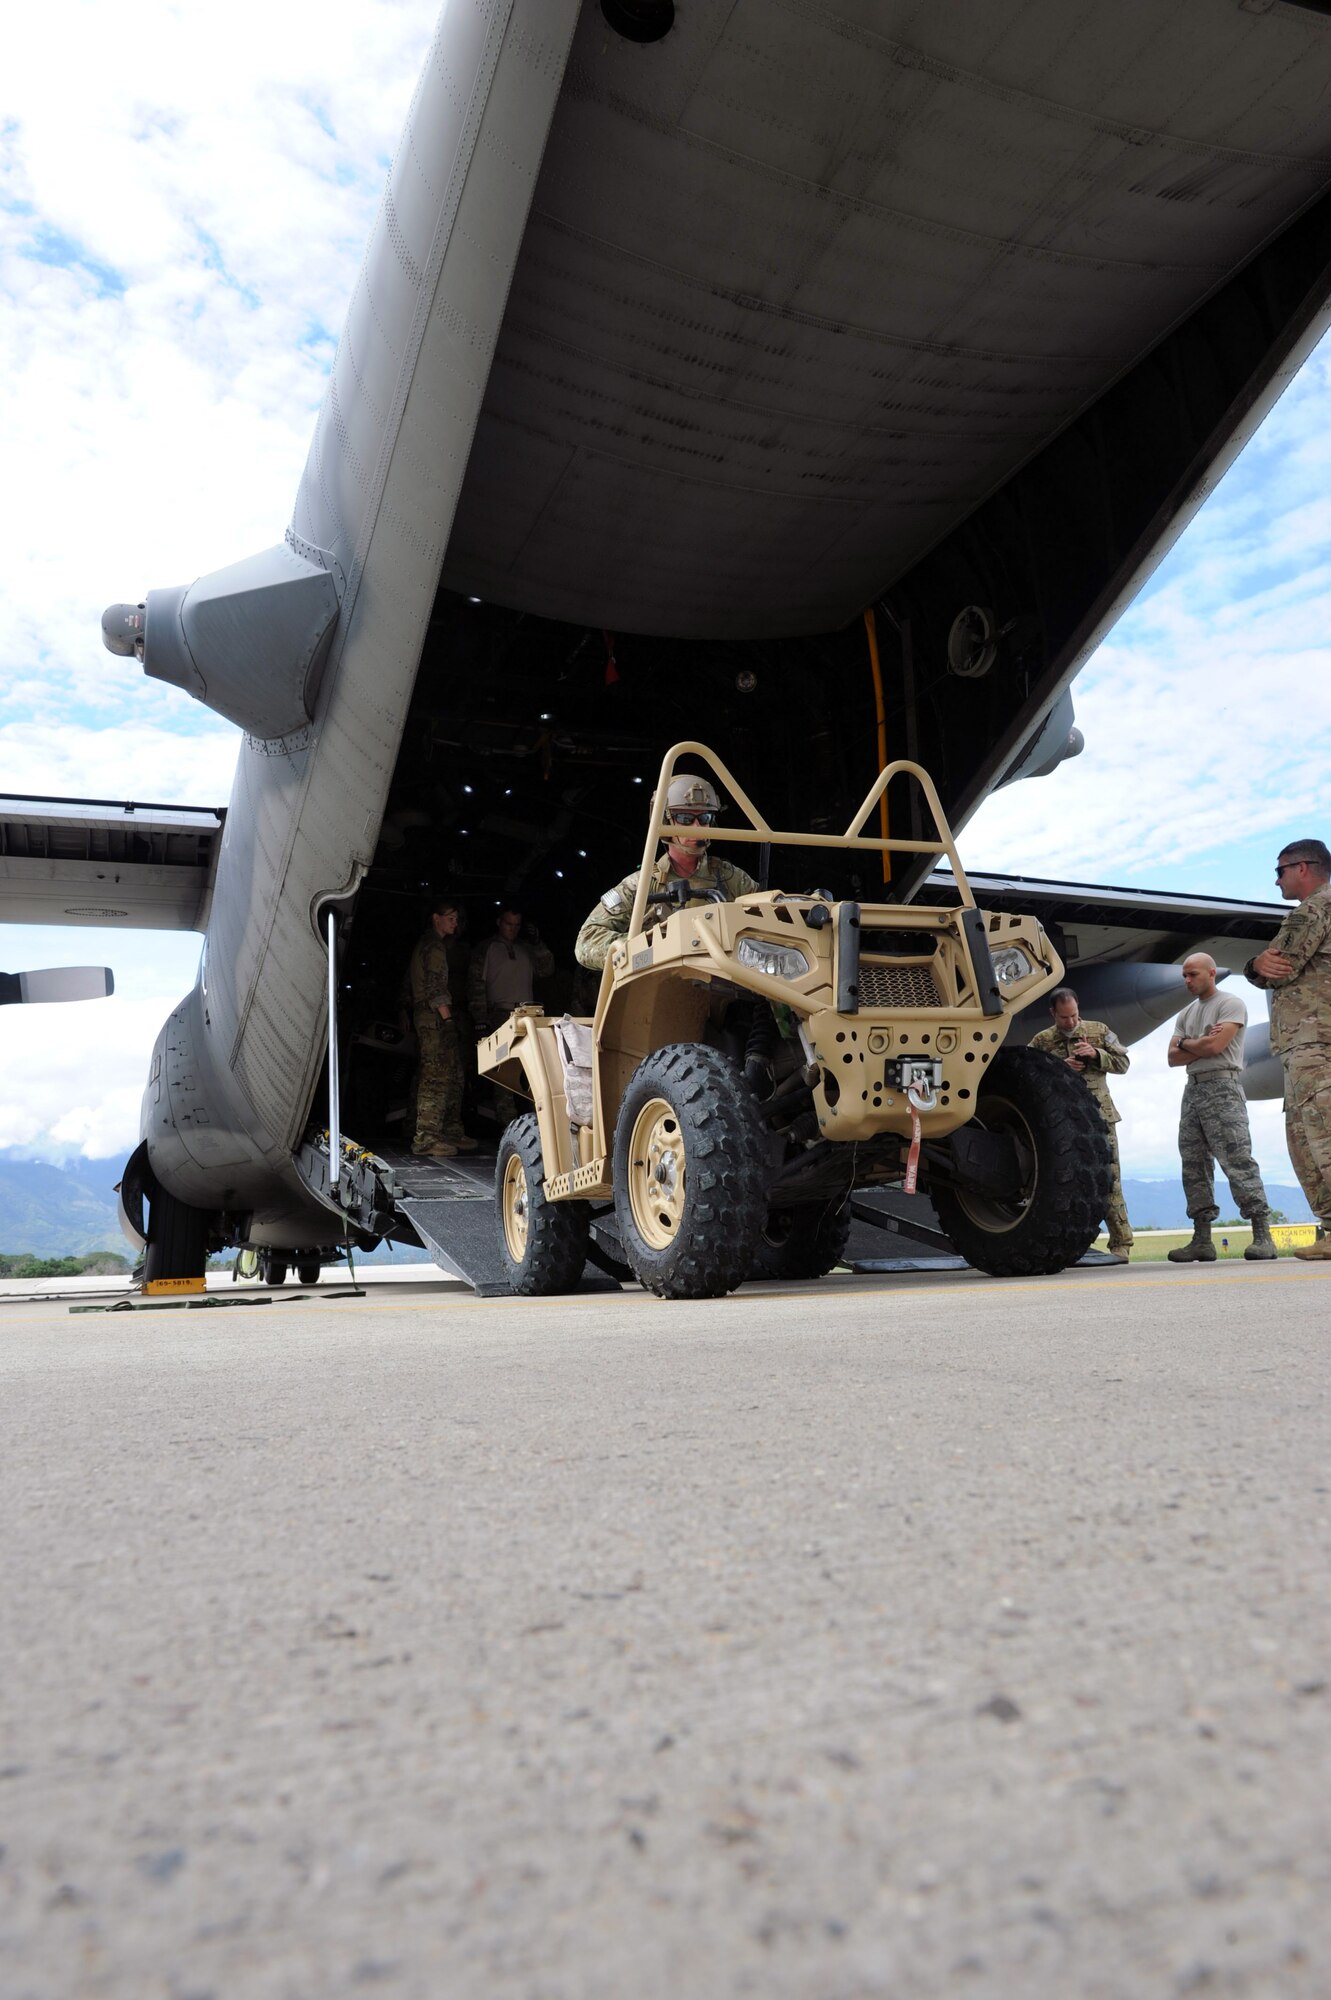 U.S. Special Forces operators from the 7th Special Forces Group (Airborne) exit a C-130 Hercules aircraft as part of RAPIDS infiltration/exfiltration training at Soto Cano Air Base, Nov. 15, 2013.  RAPIDS is a Special Forces tactic for quickly inserting and removing personnel into and out of an area, and is used for personnel recovery of an isolated individual.  (Photo by Martin Chahin)